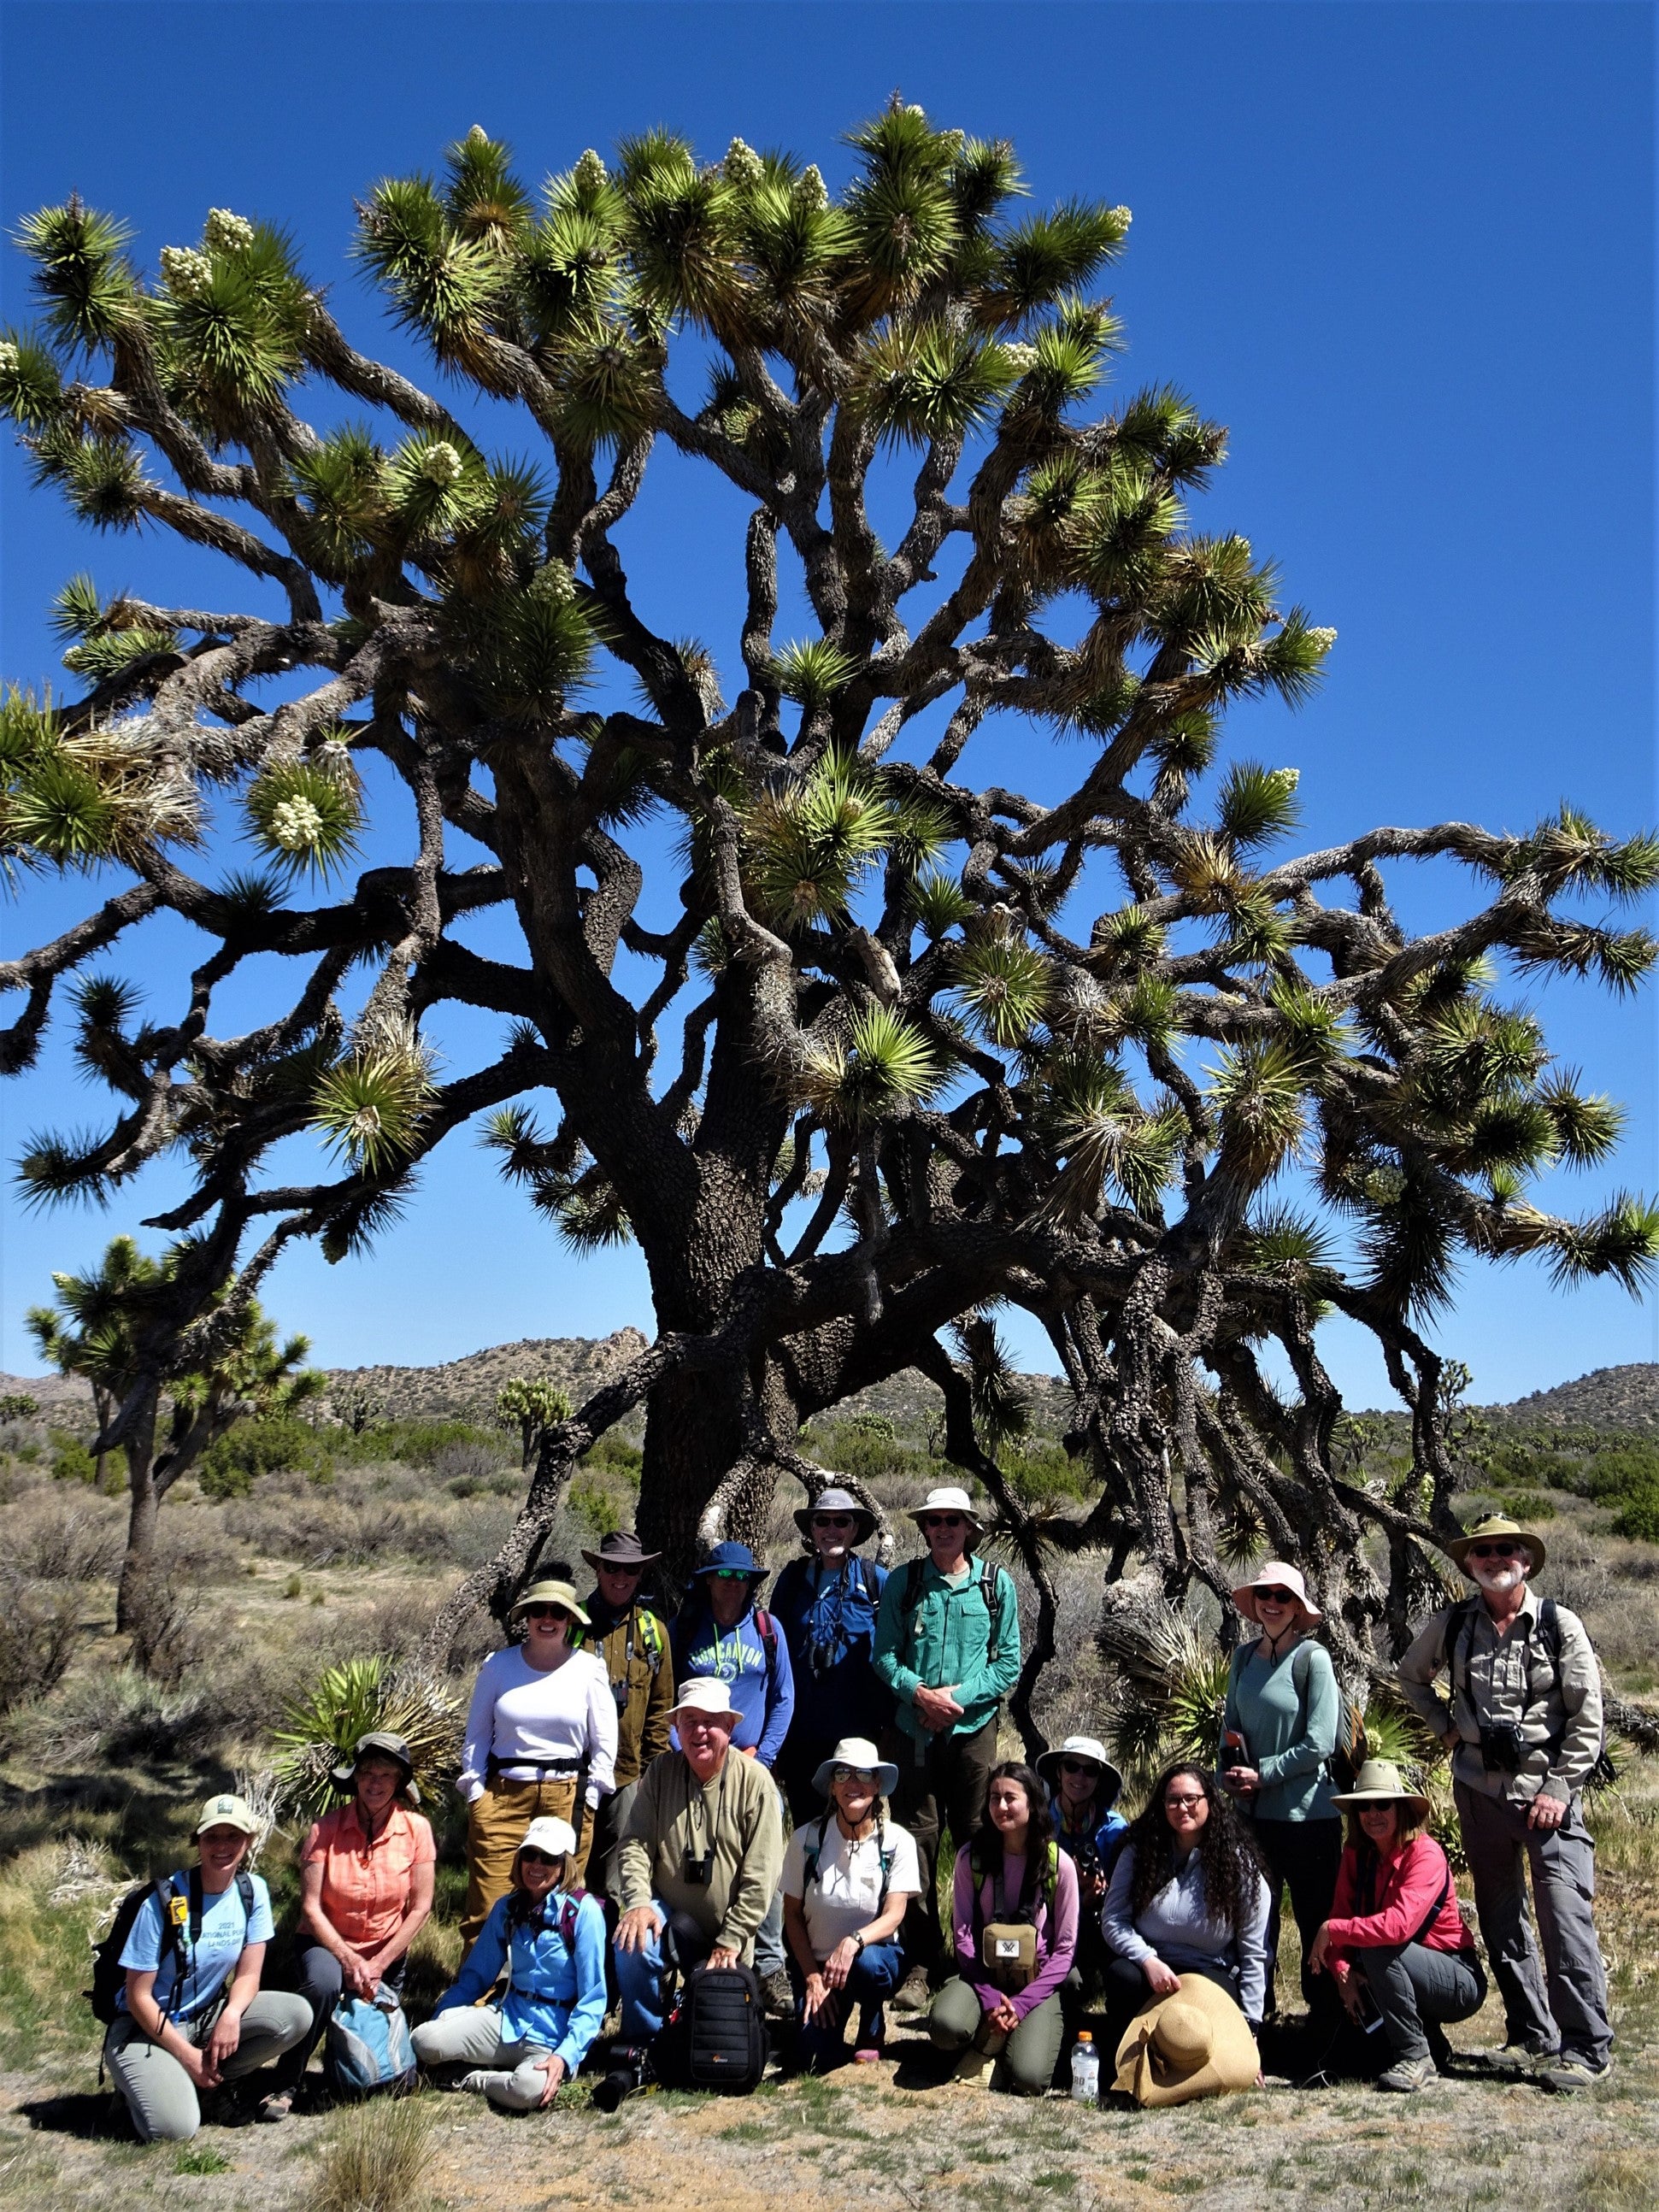 A group of community scientists posed in front of a Joshua tree